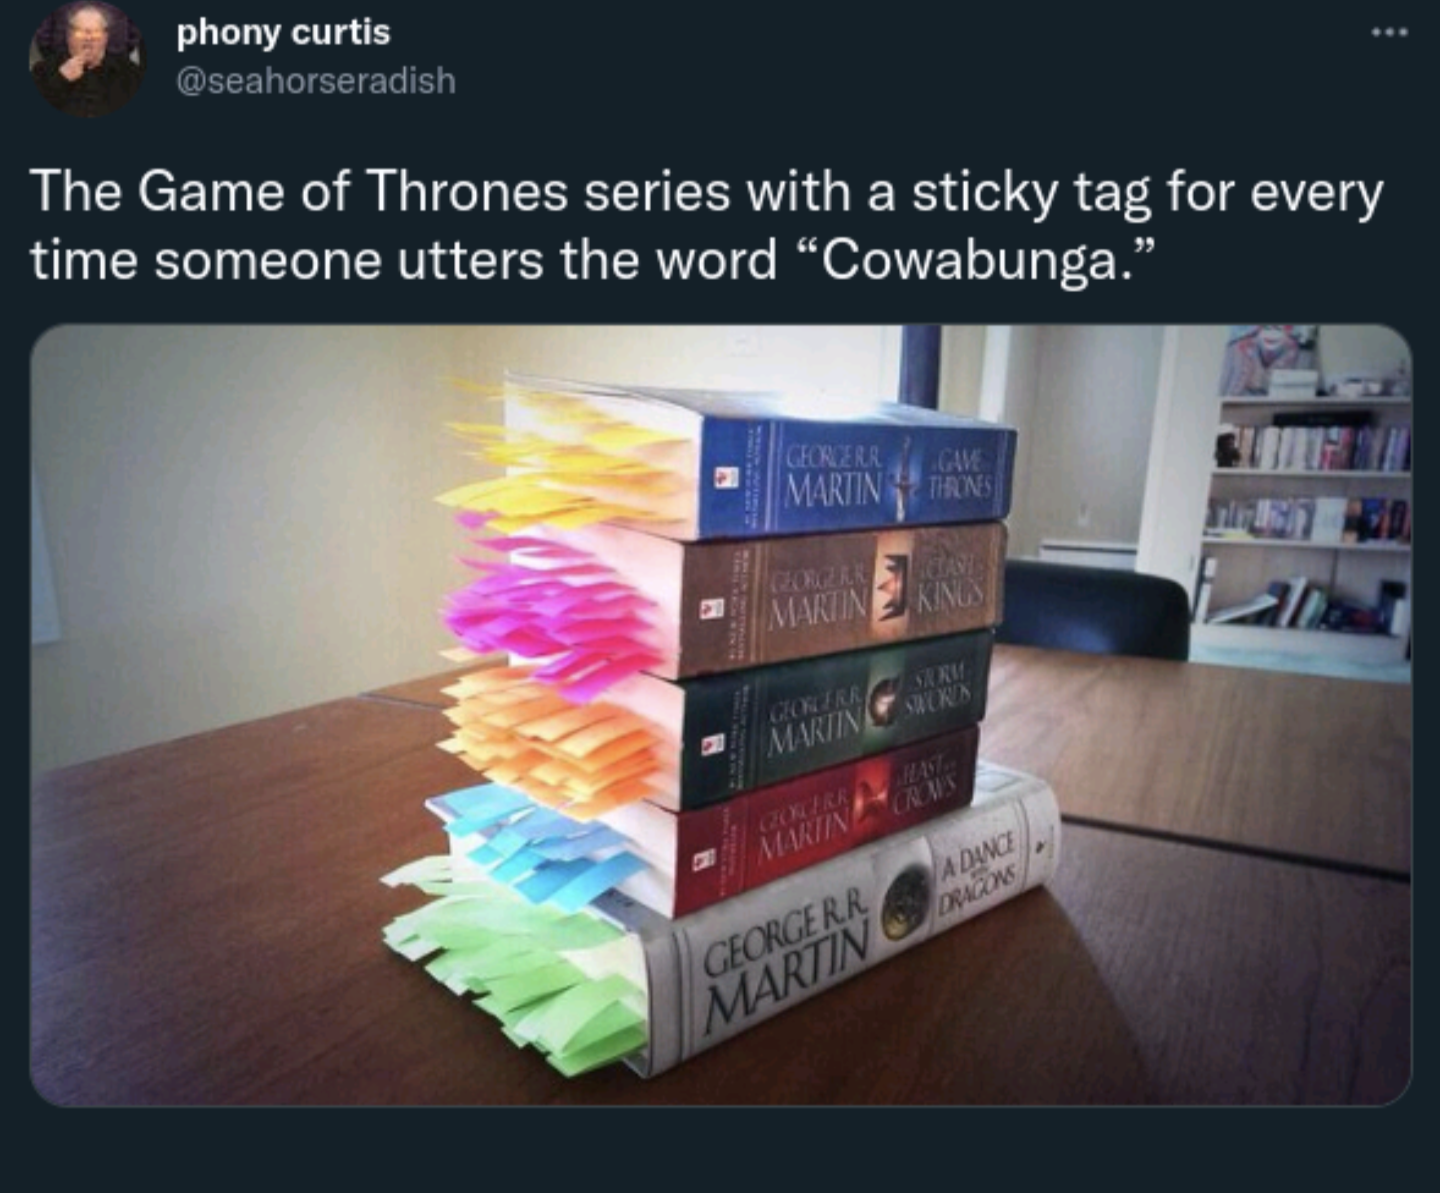 Fresh Pics And Memes - game of thrones sticky note death - phony curtis The Game of Thrones series with a sticky tag for every time someone utters the word